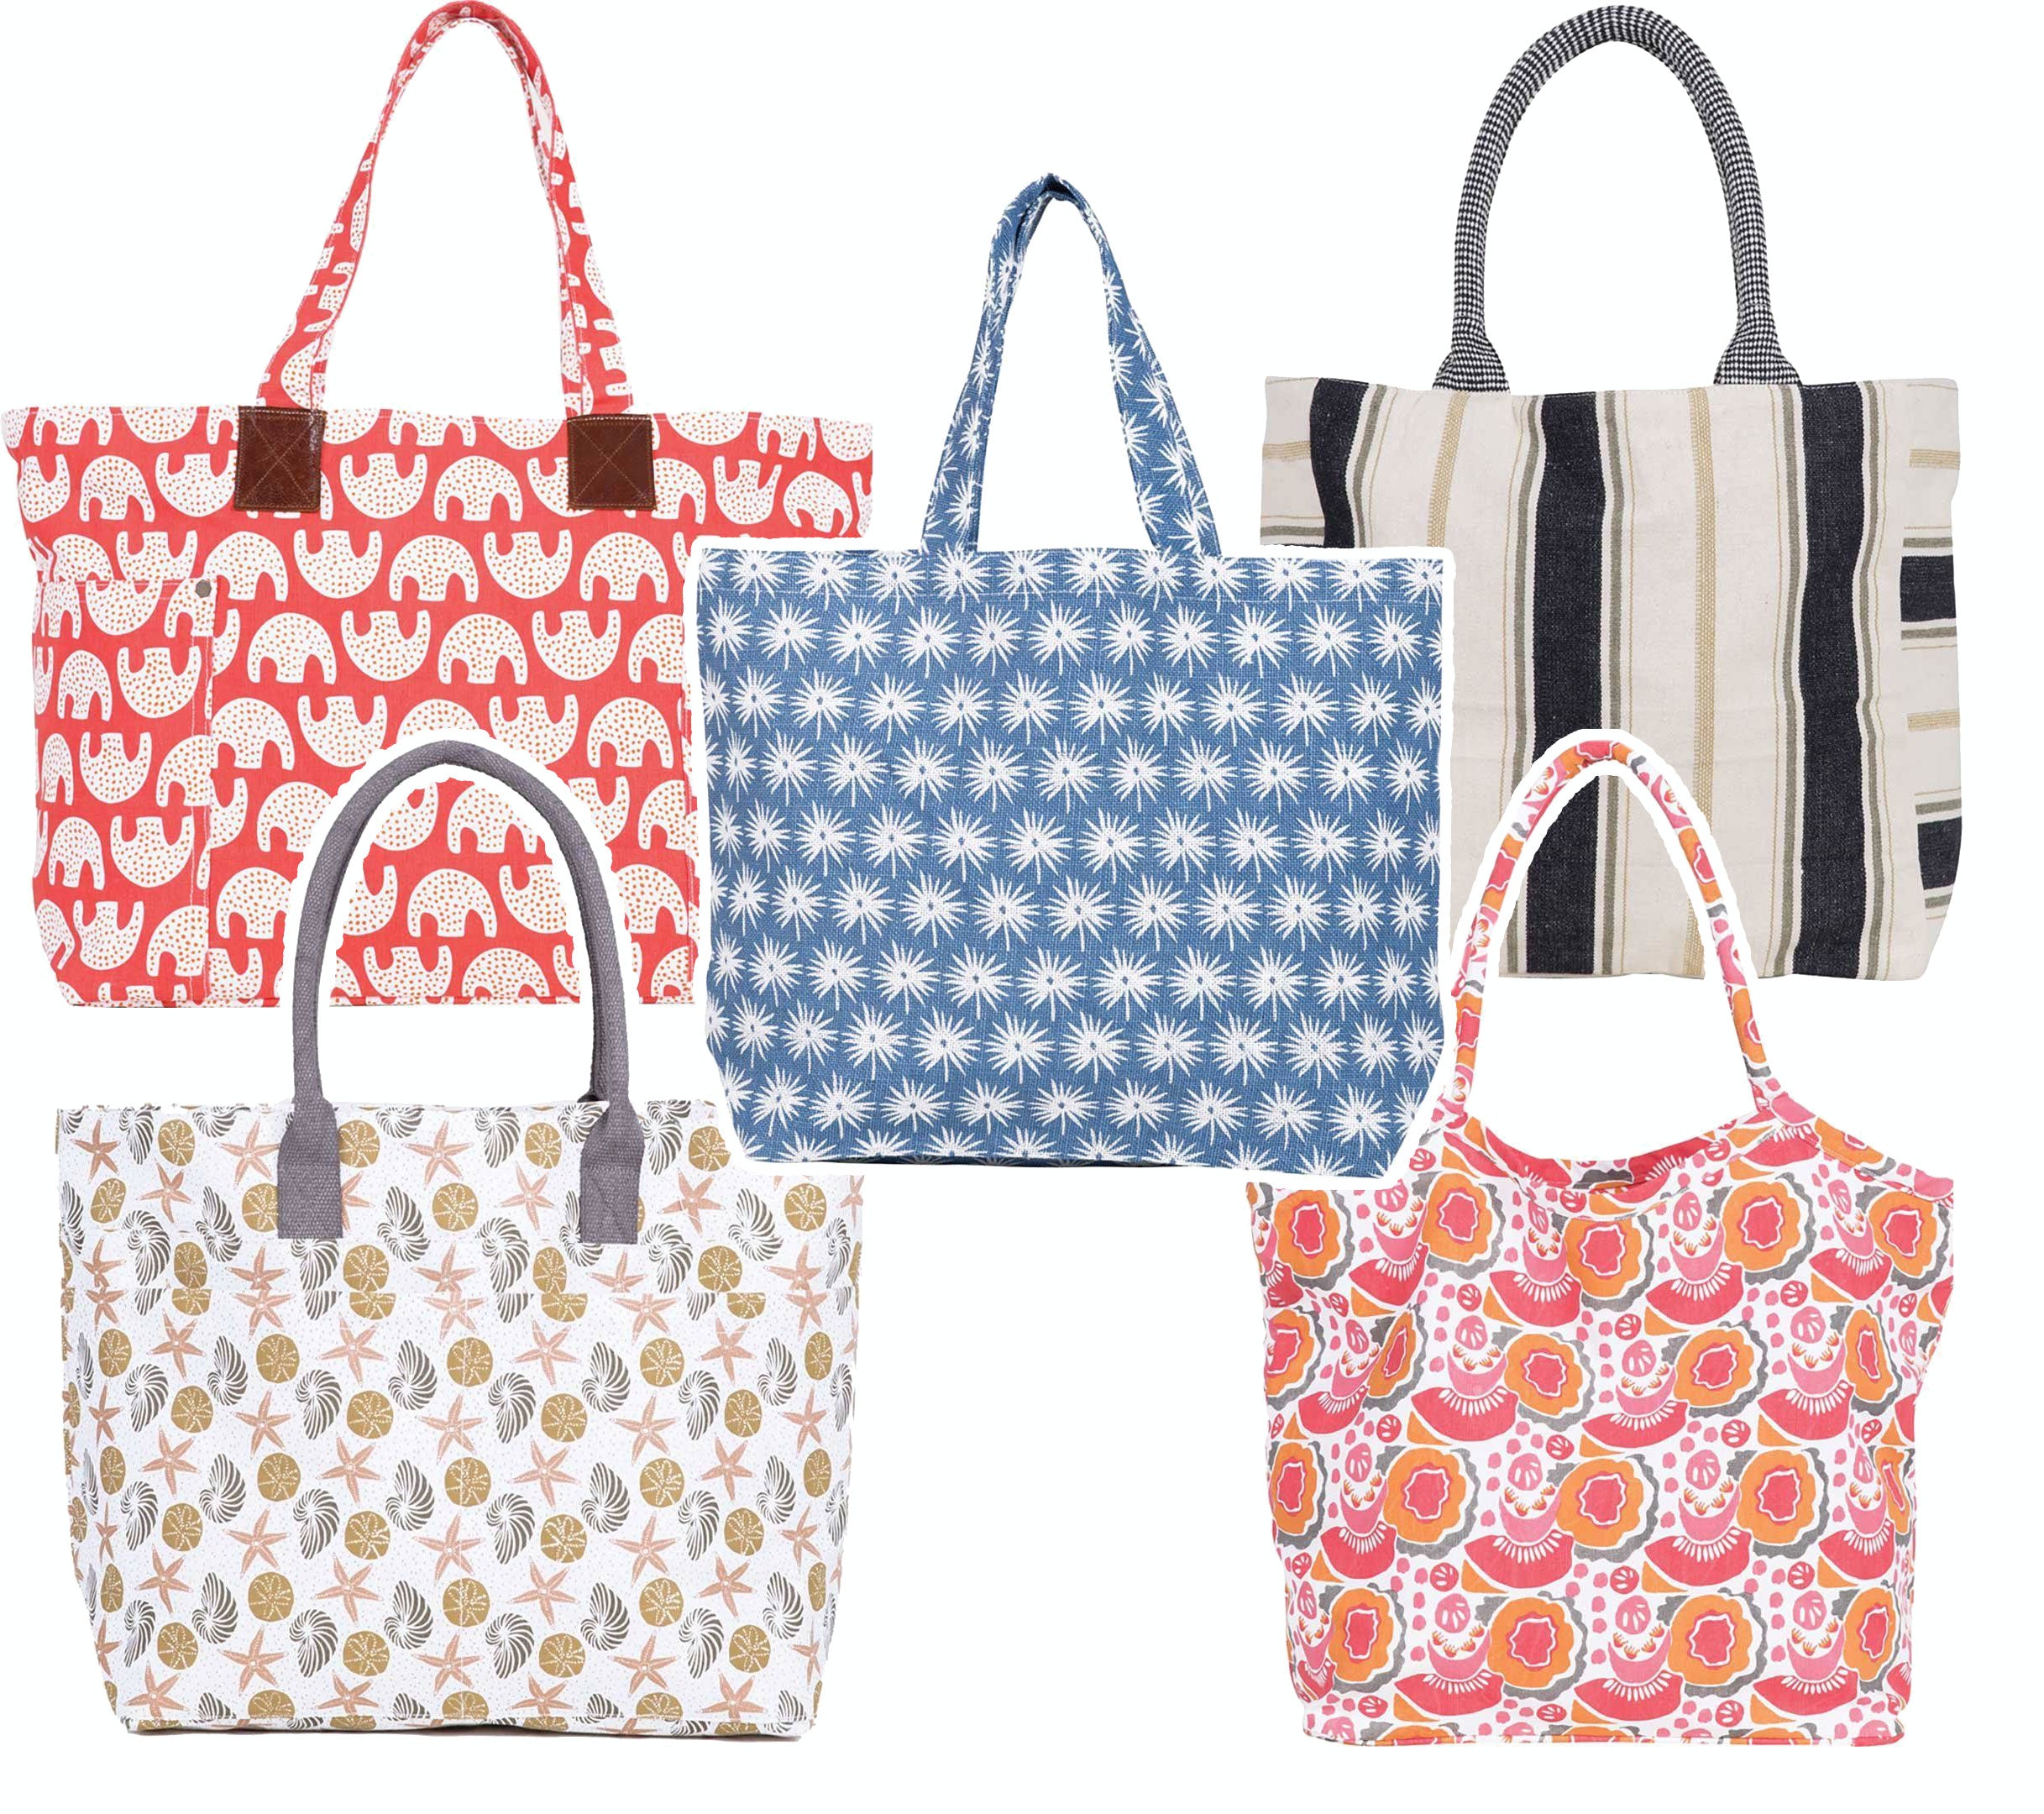 Collect all of our cute tote bags for the beach!